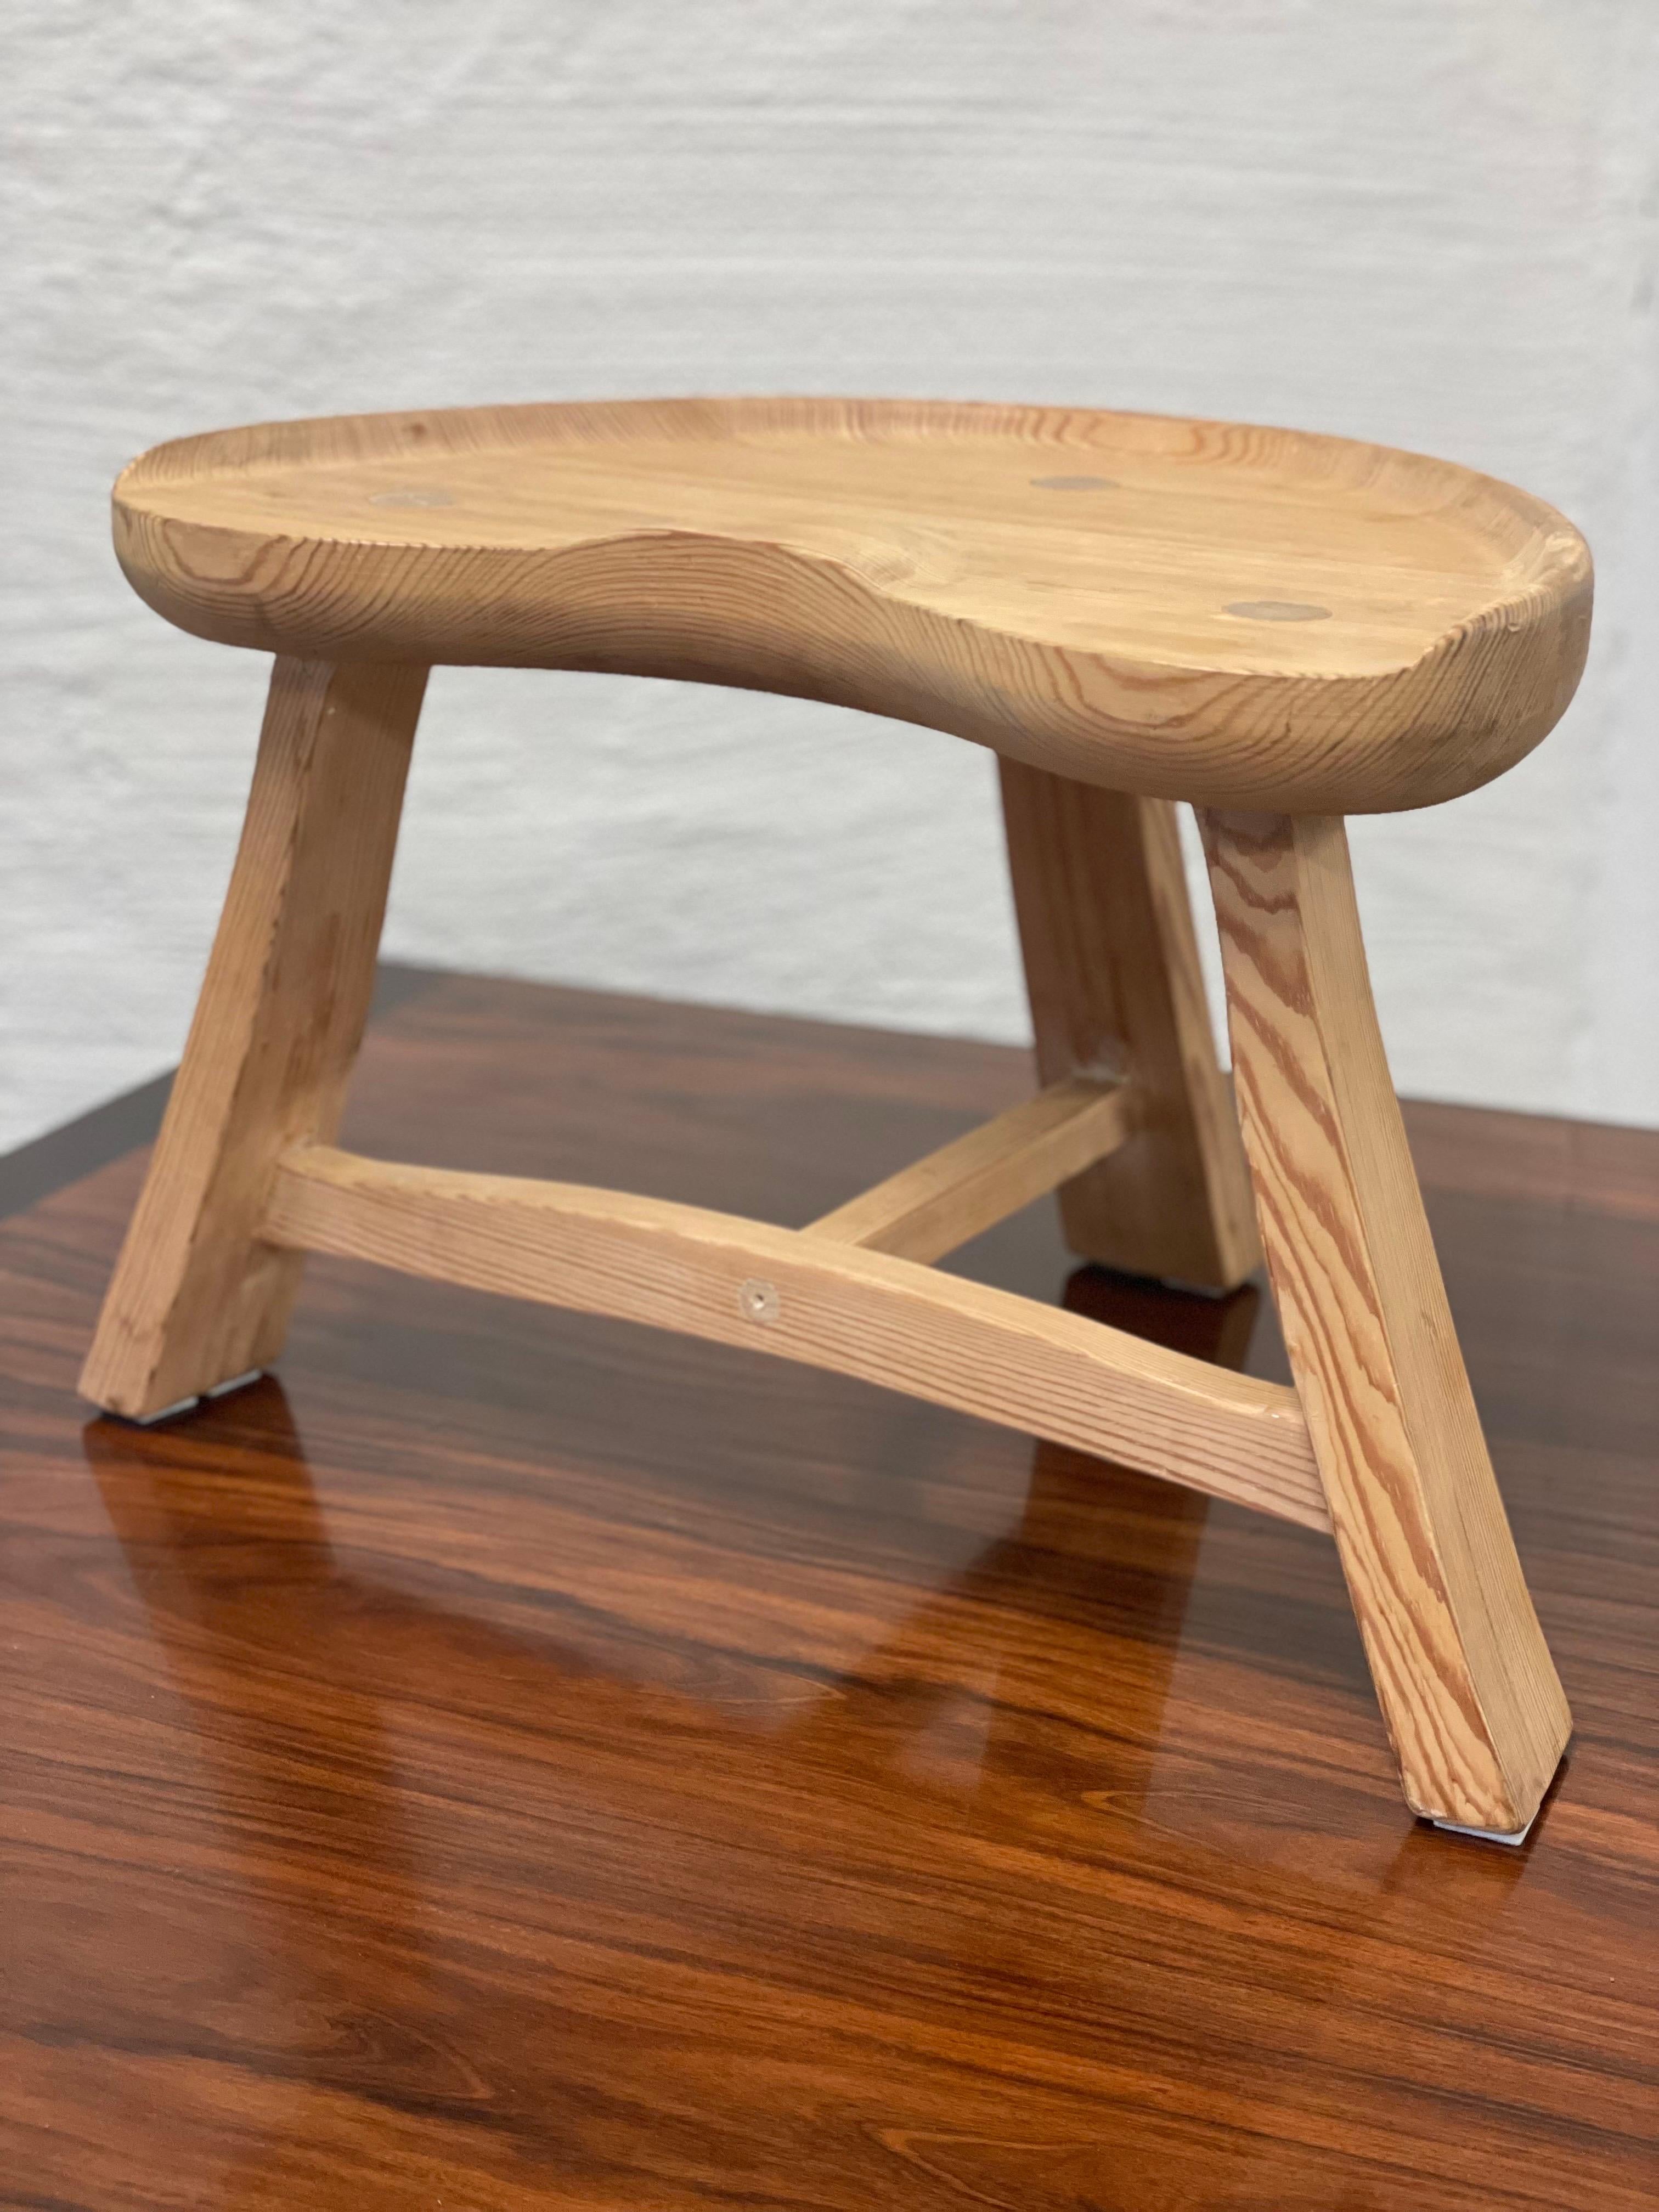 Three legged sculpted pine stool by Krogenæs Møbler, Norway 1960s
Selling this beautiful stool we call a 